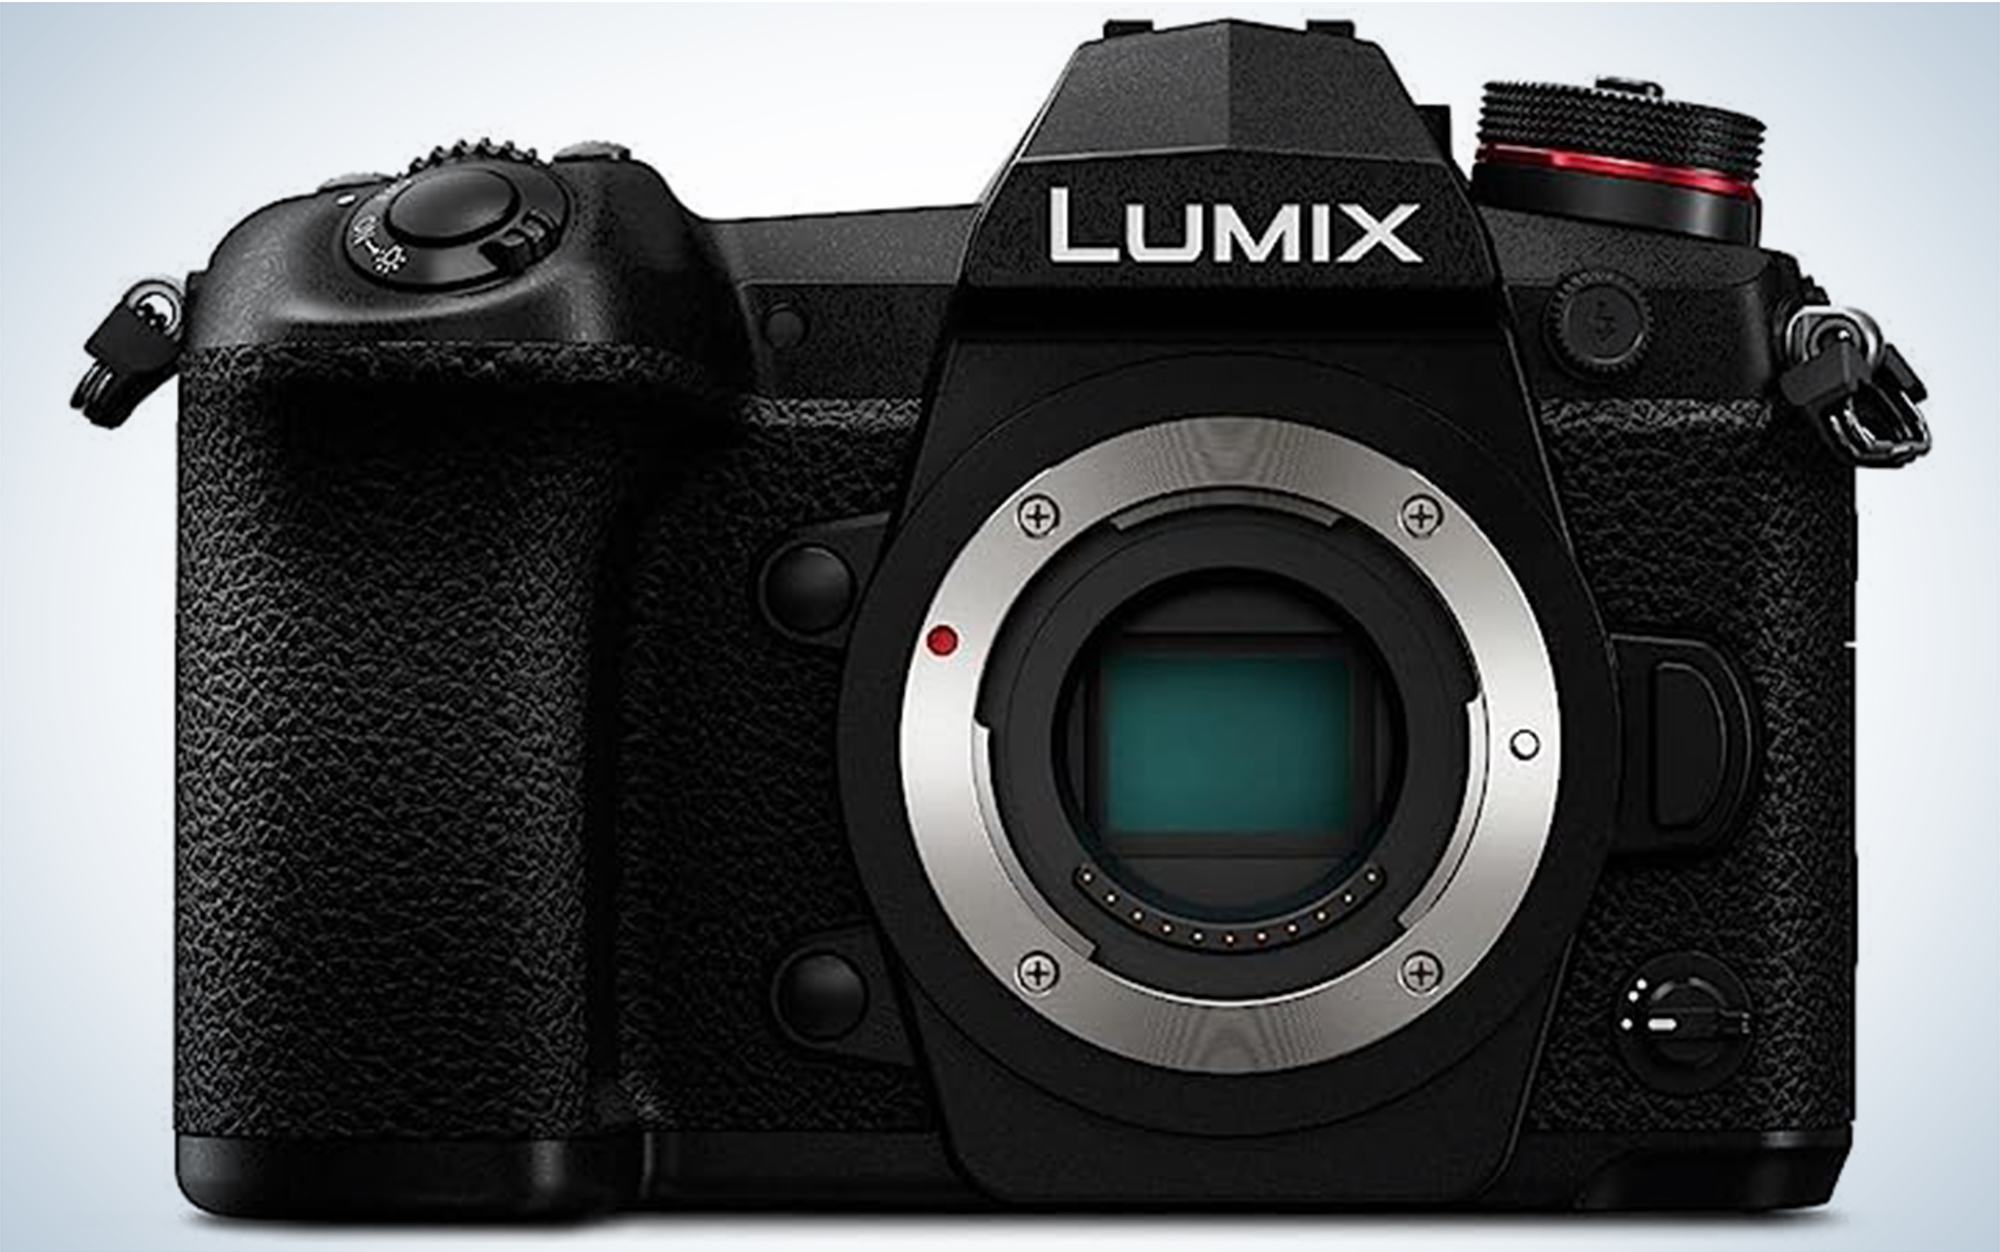 The Panasonic Lumix G9 is one of the best cameras for wildlife photography.